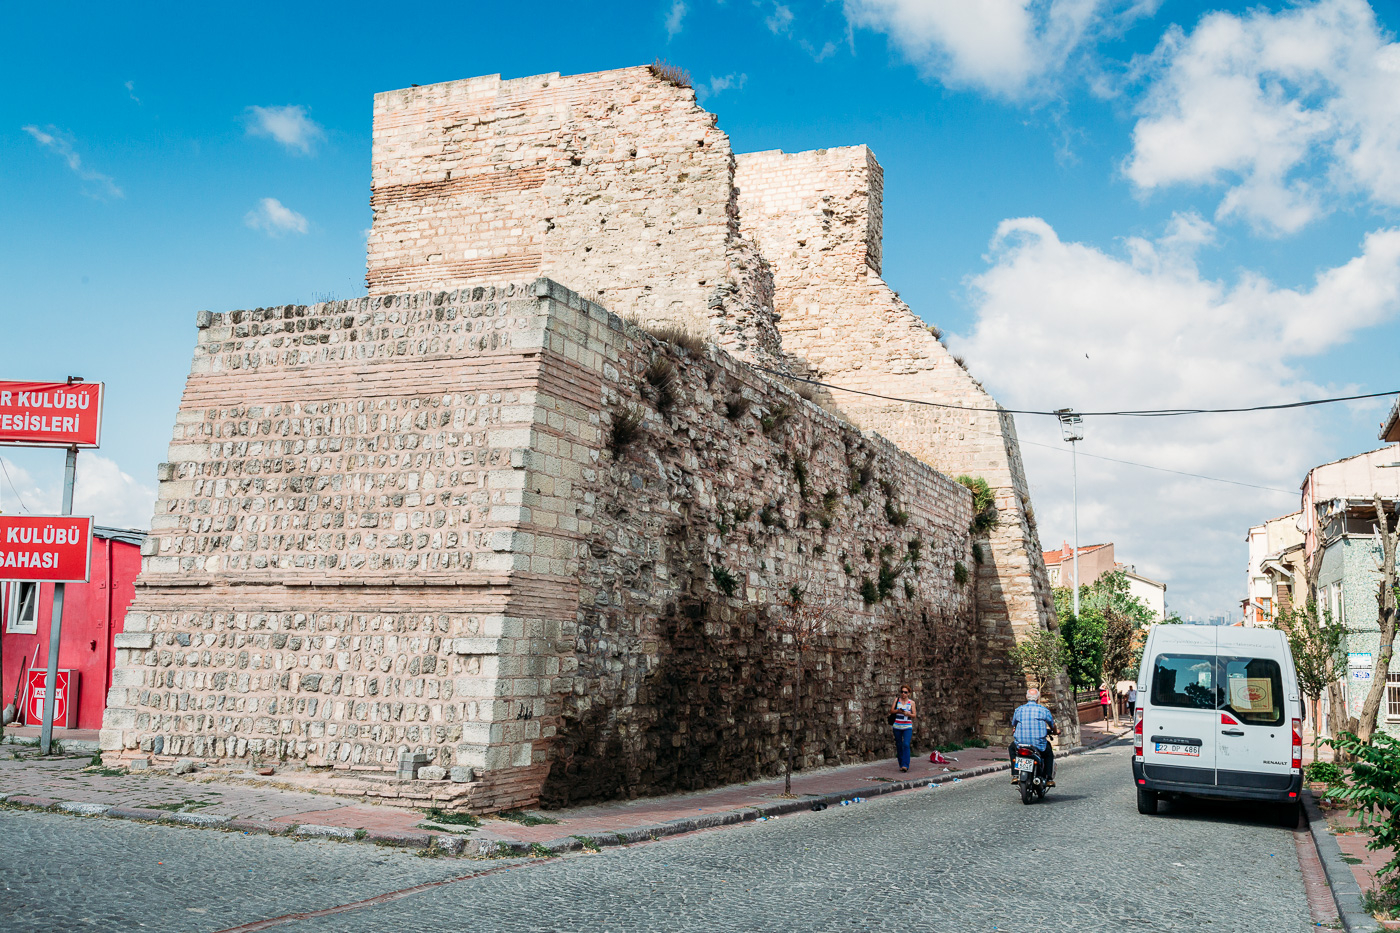 Biking along the Wall of Constantine in Istanbul, Turkey